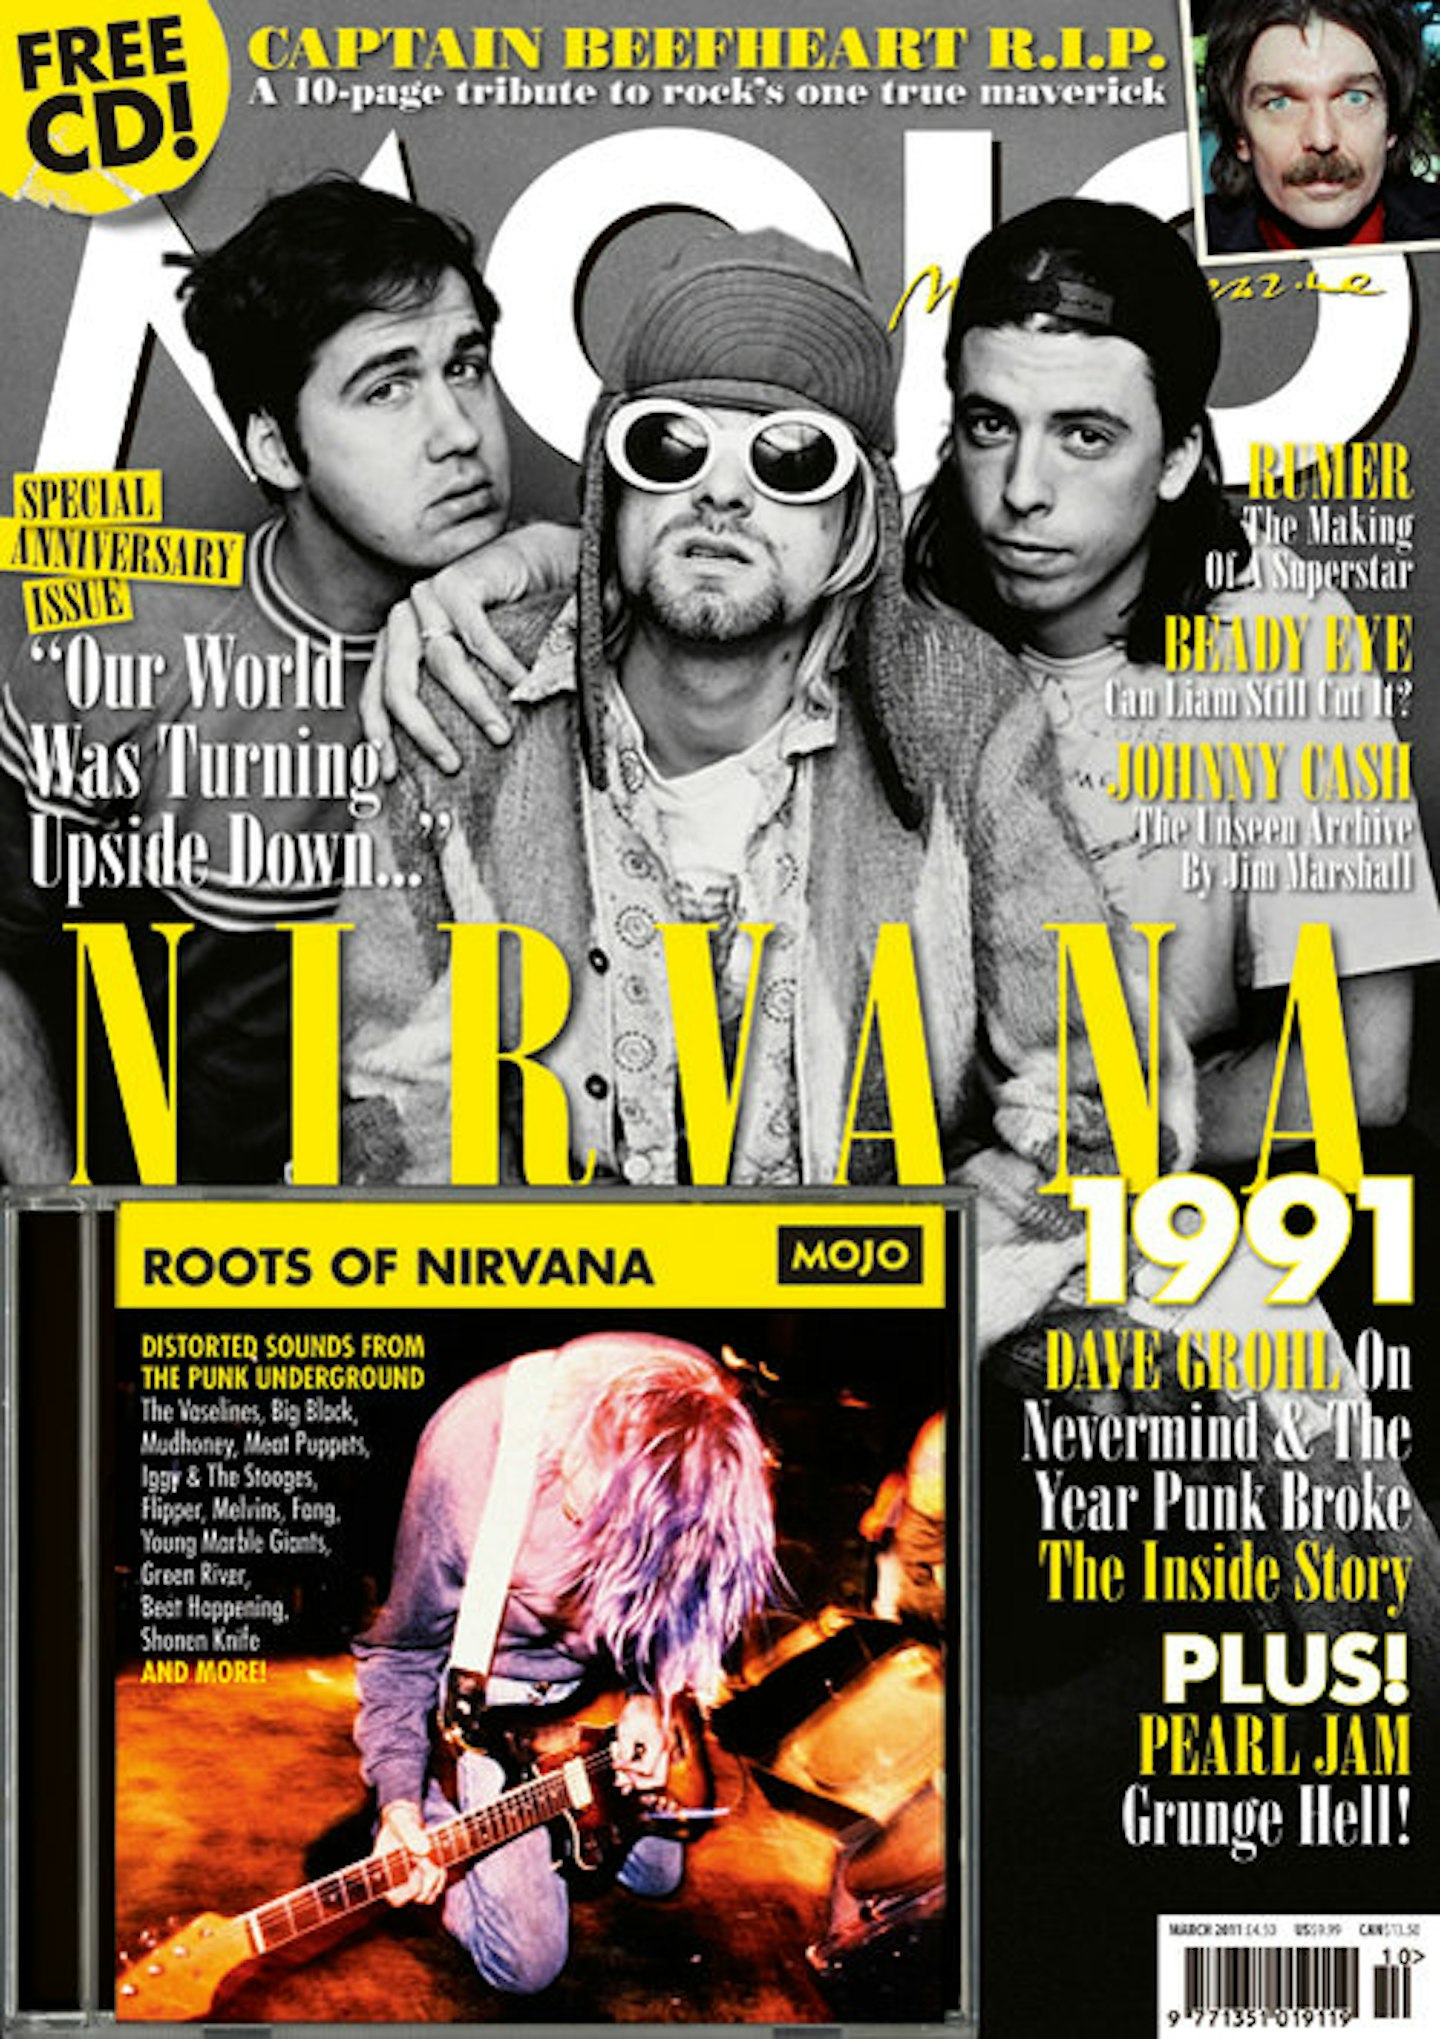 MOJO Issue 208 / March 2011